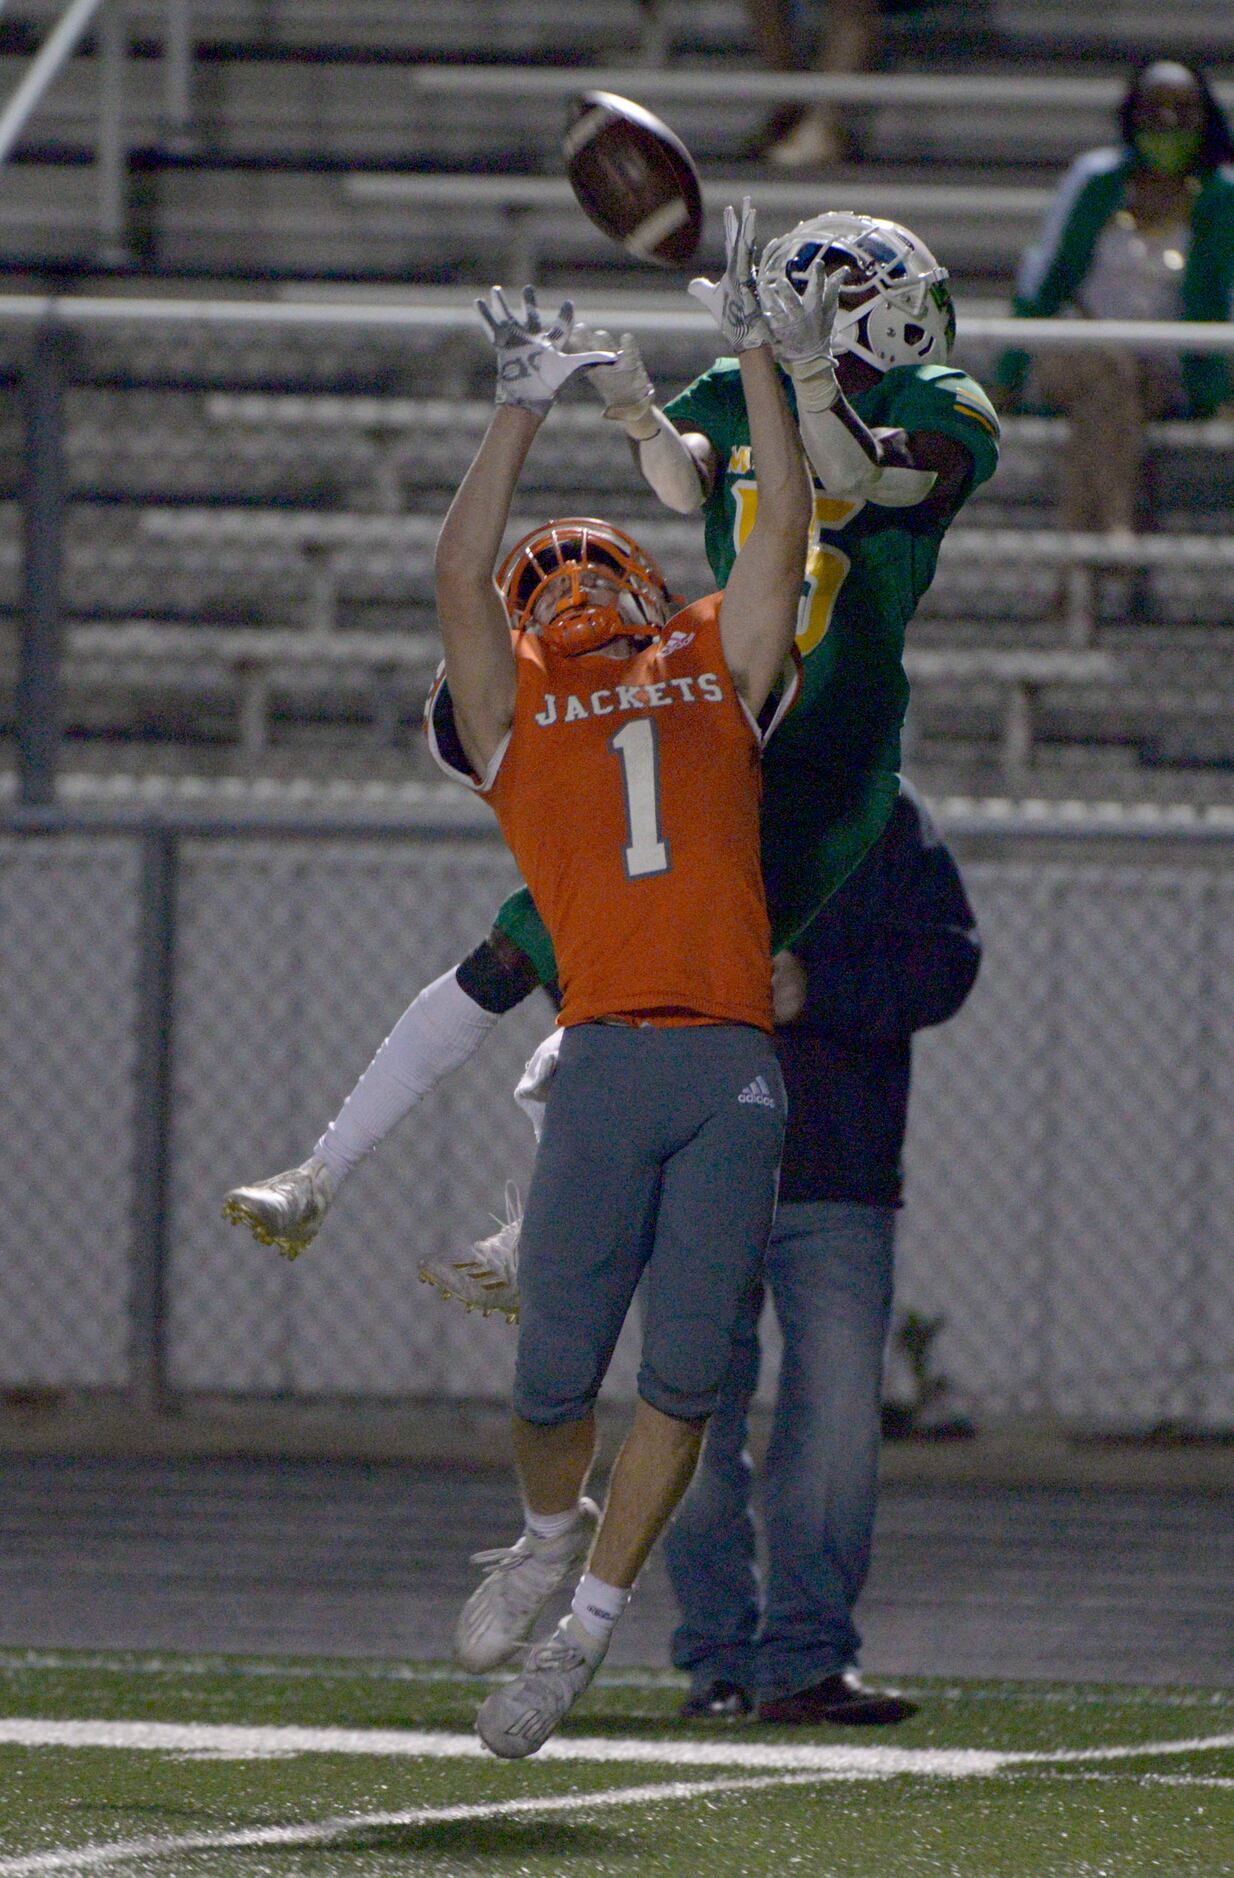 Madison’s Avery Fulce breaks up a pass intended for Mineola’s Thomas Hooton (1) in the third...